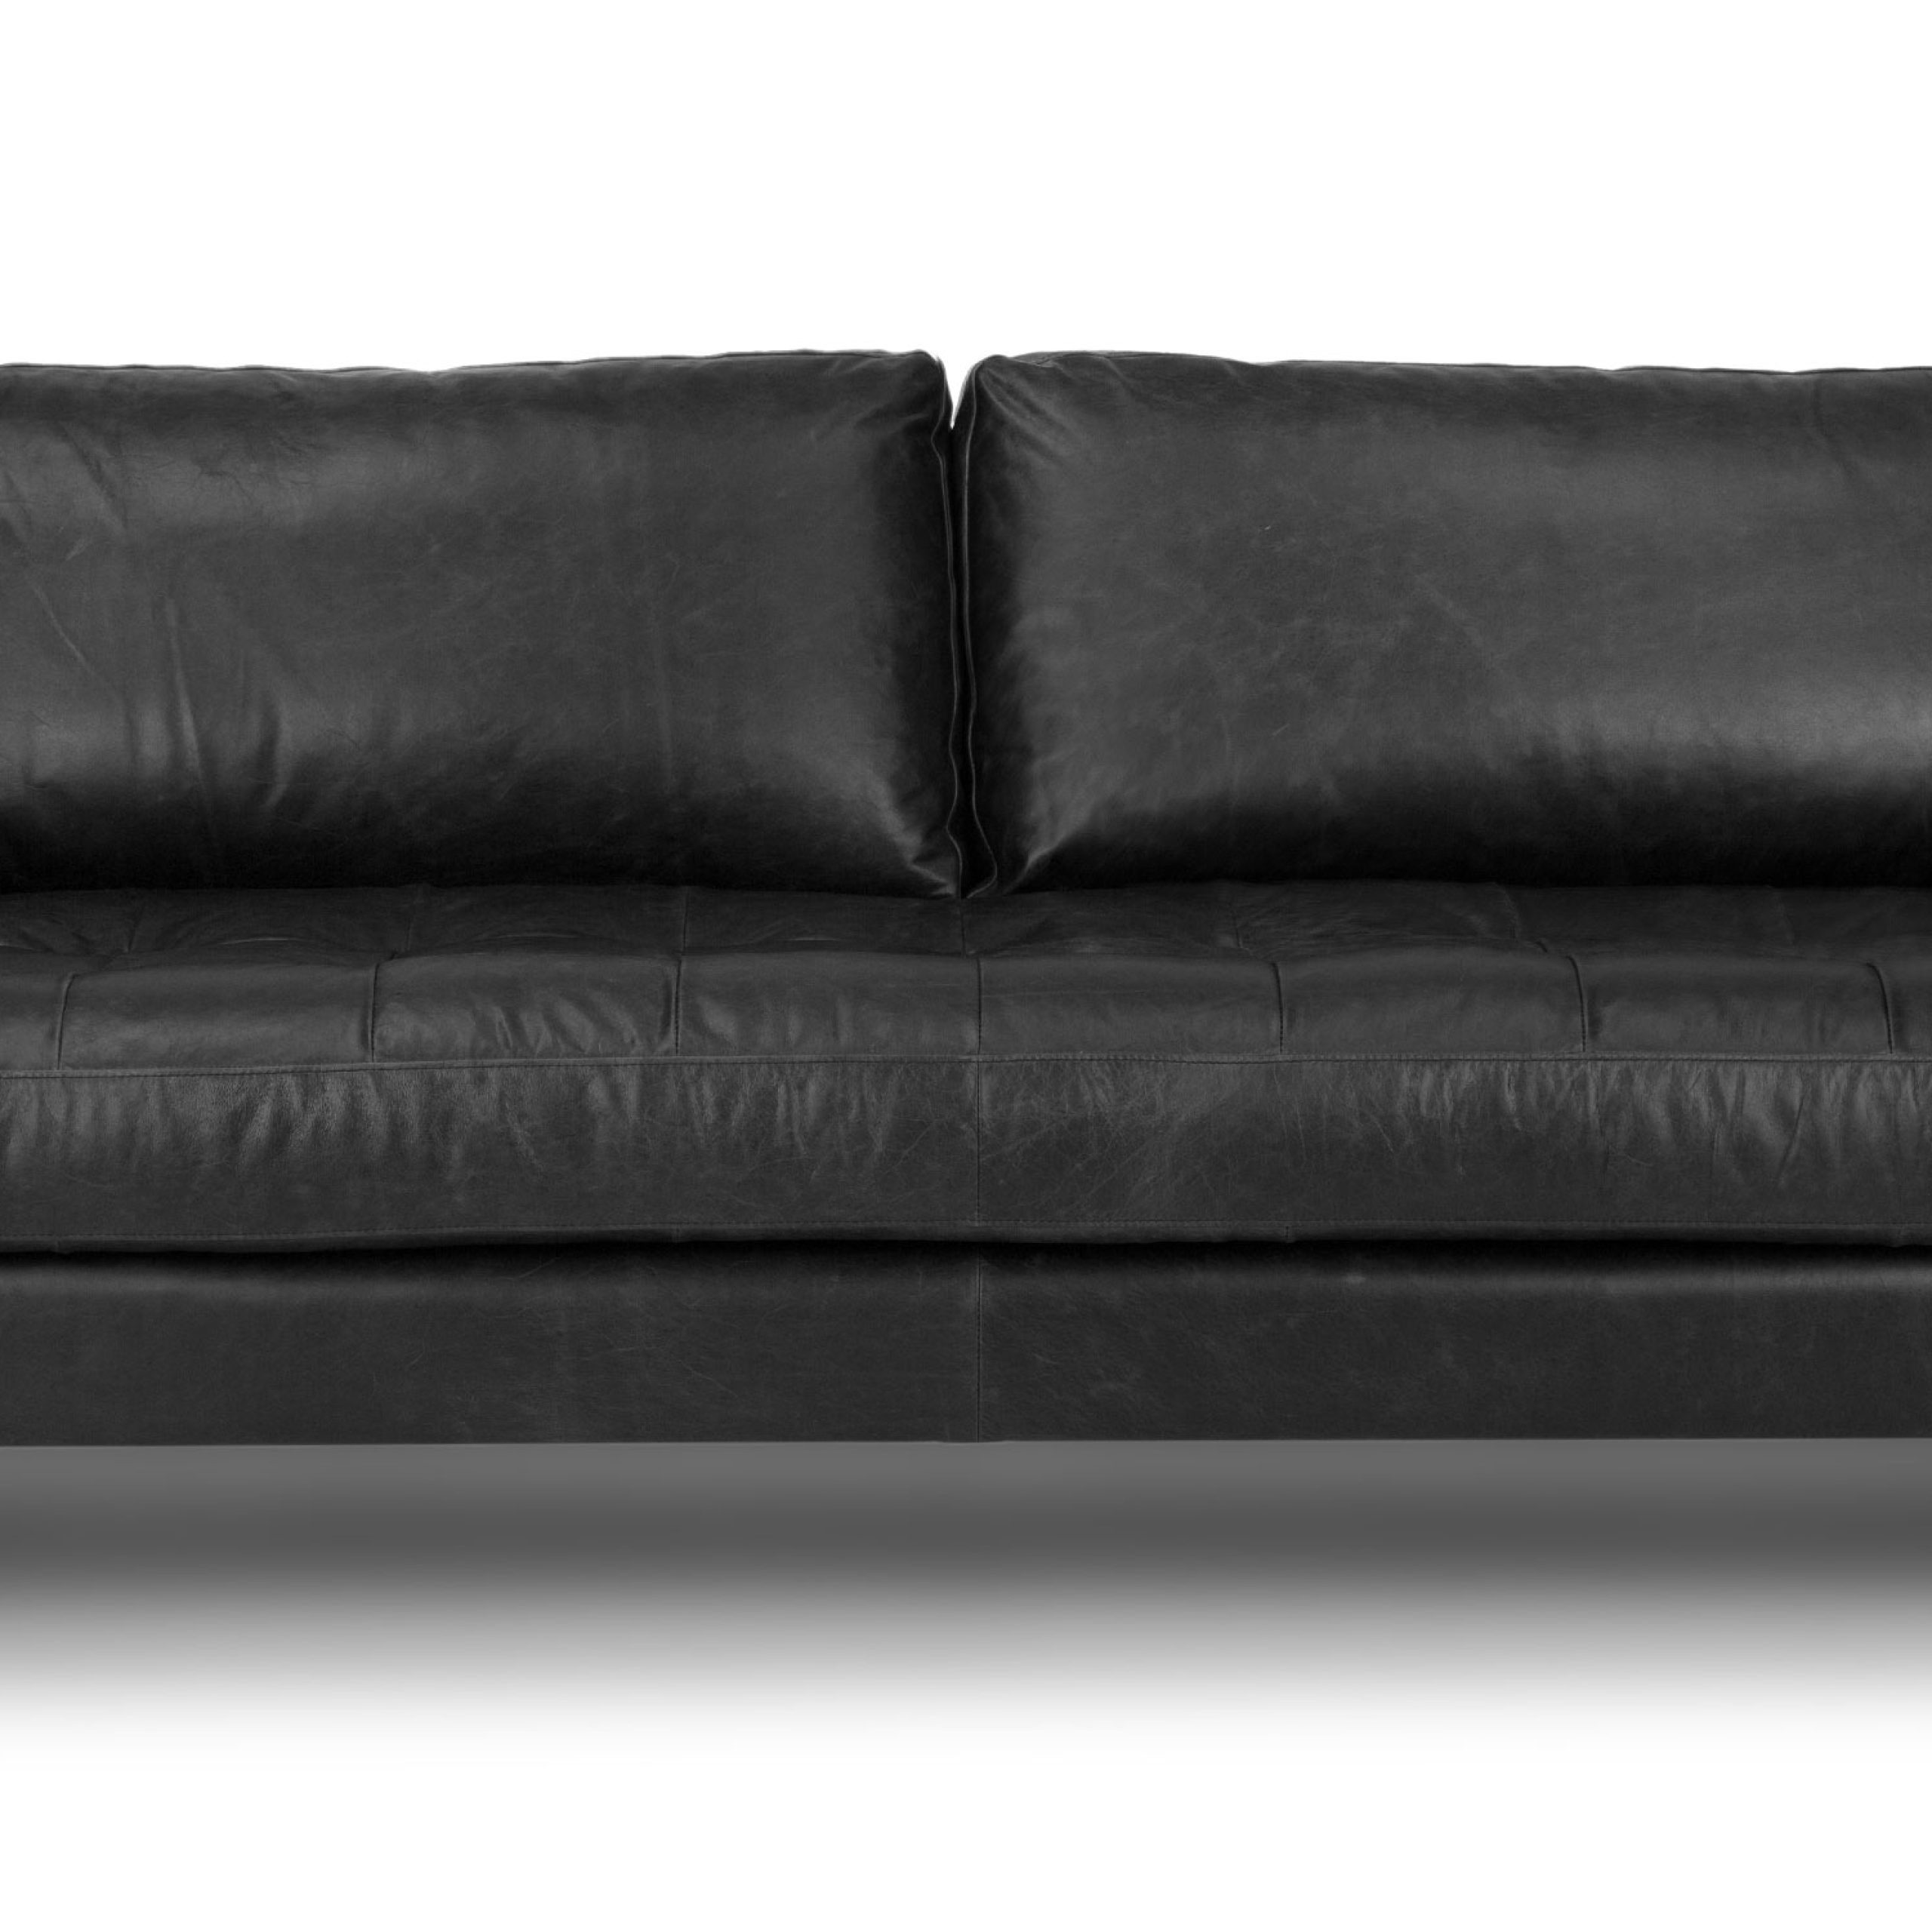 Sven Walnut & Oxford Black Leather 3 Seater Sofa | Article Throughout Sofas In Black (View 15 of 15)